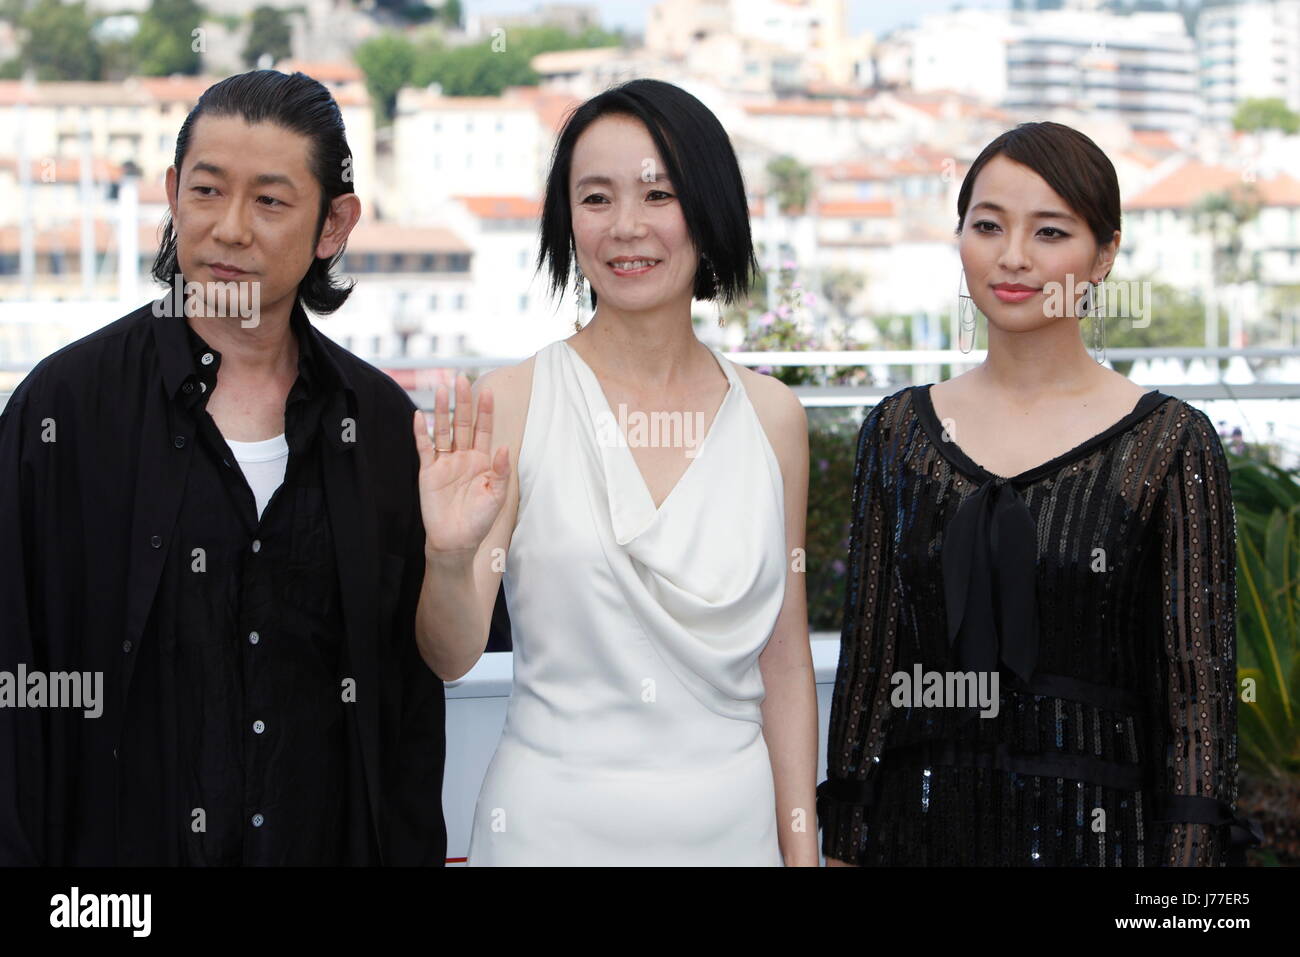 Cannes, France. 23rd May, 2017. Actors Masatoshi Nagase (L-R), Misuzu Kanno and Ayame Misaka pose at the photocall of the movie 'Radiance (Hikari)' during the 70th Annual Cannes Film Festival at Palais des Festivals in Cannes, France, on 23 May 2017. - NO WIRE SERVICE · Photo: Hubert Boesl/dpa/Alamy Live News Stock Photo